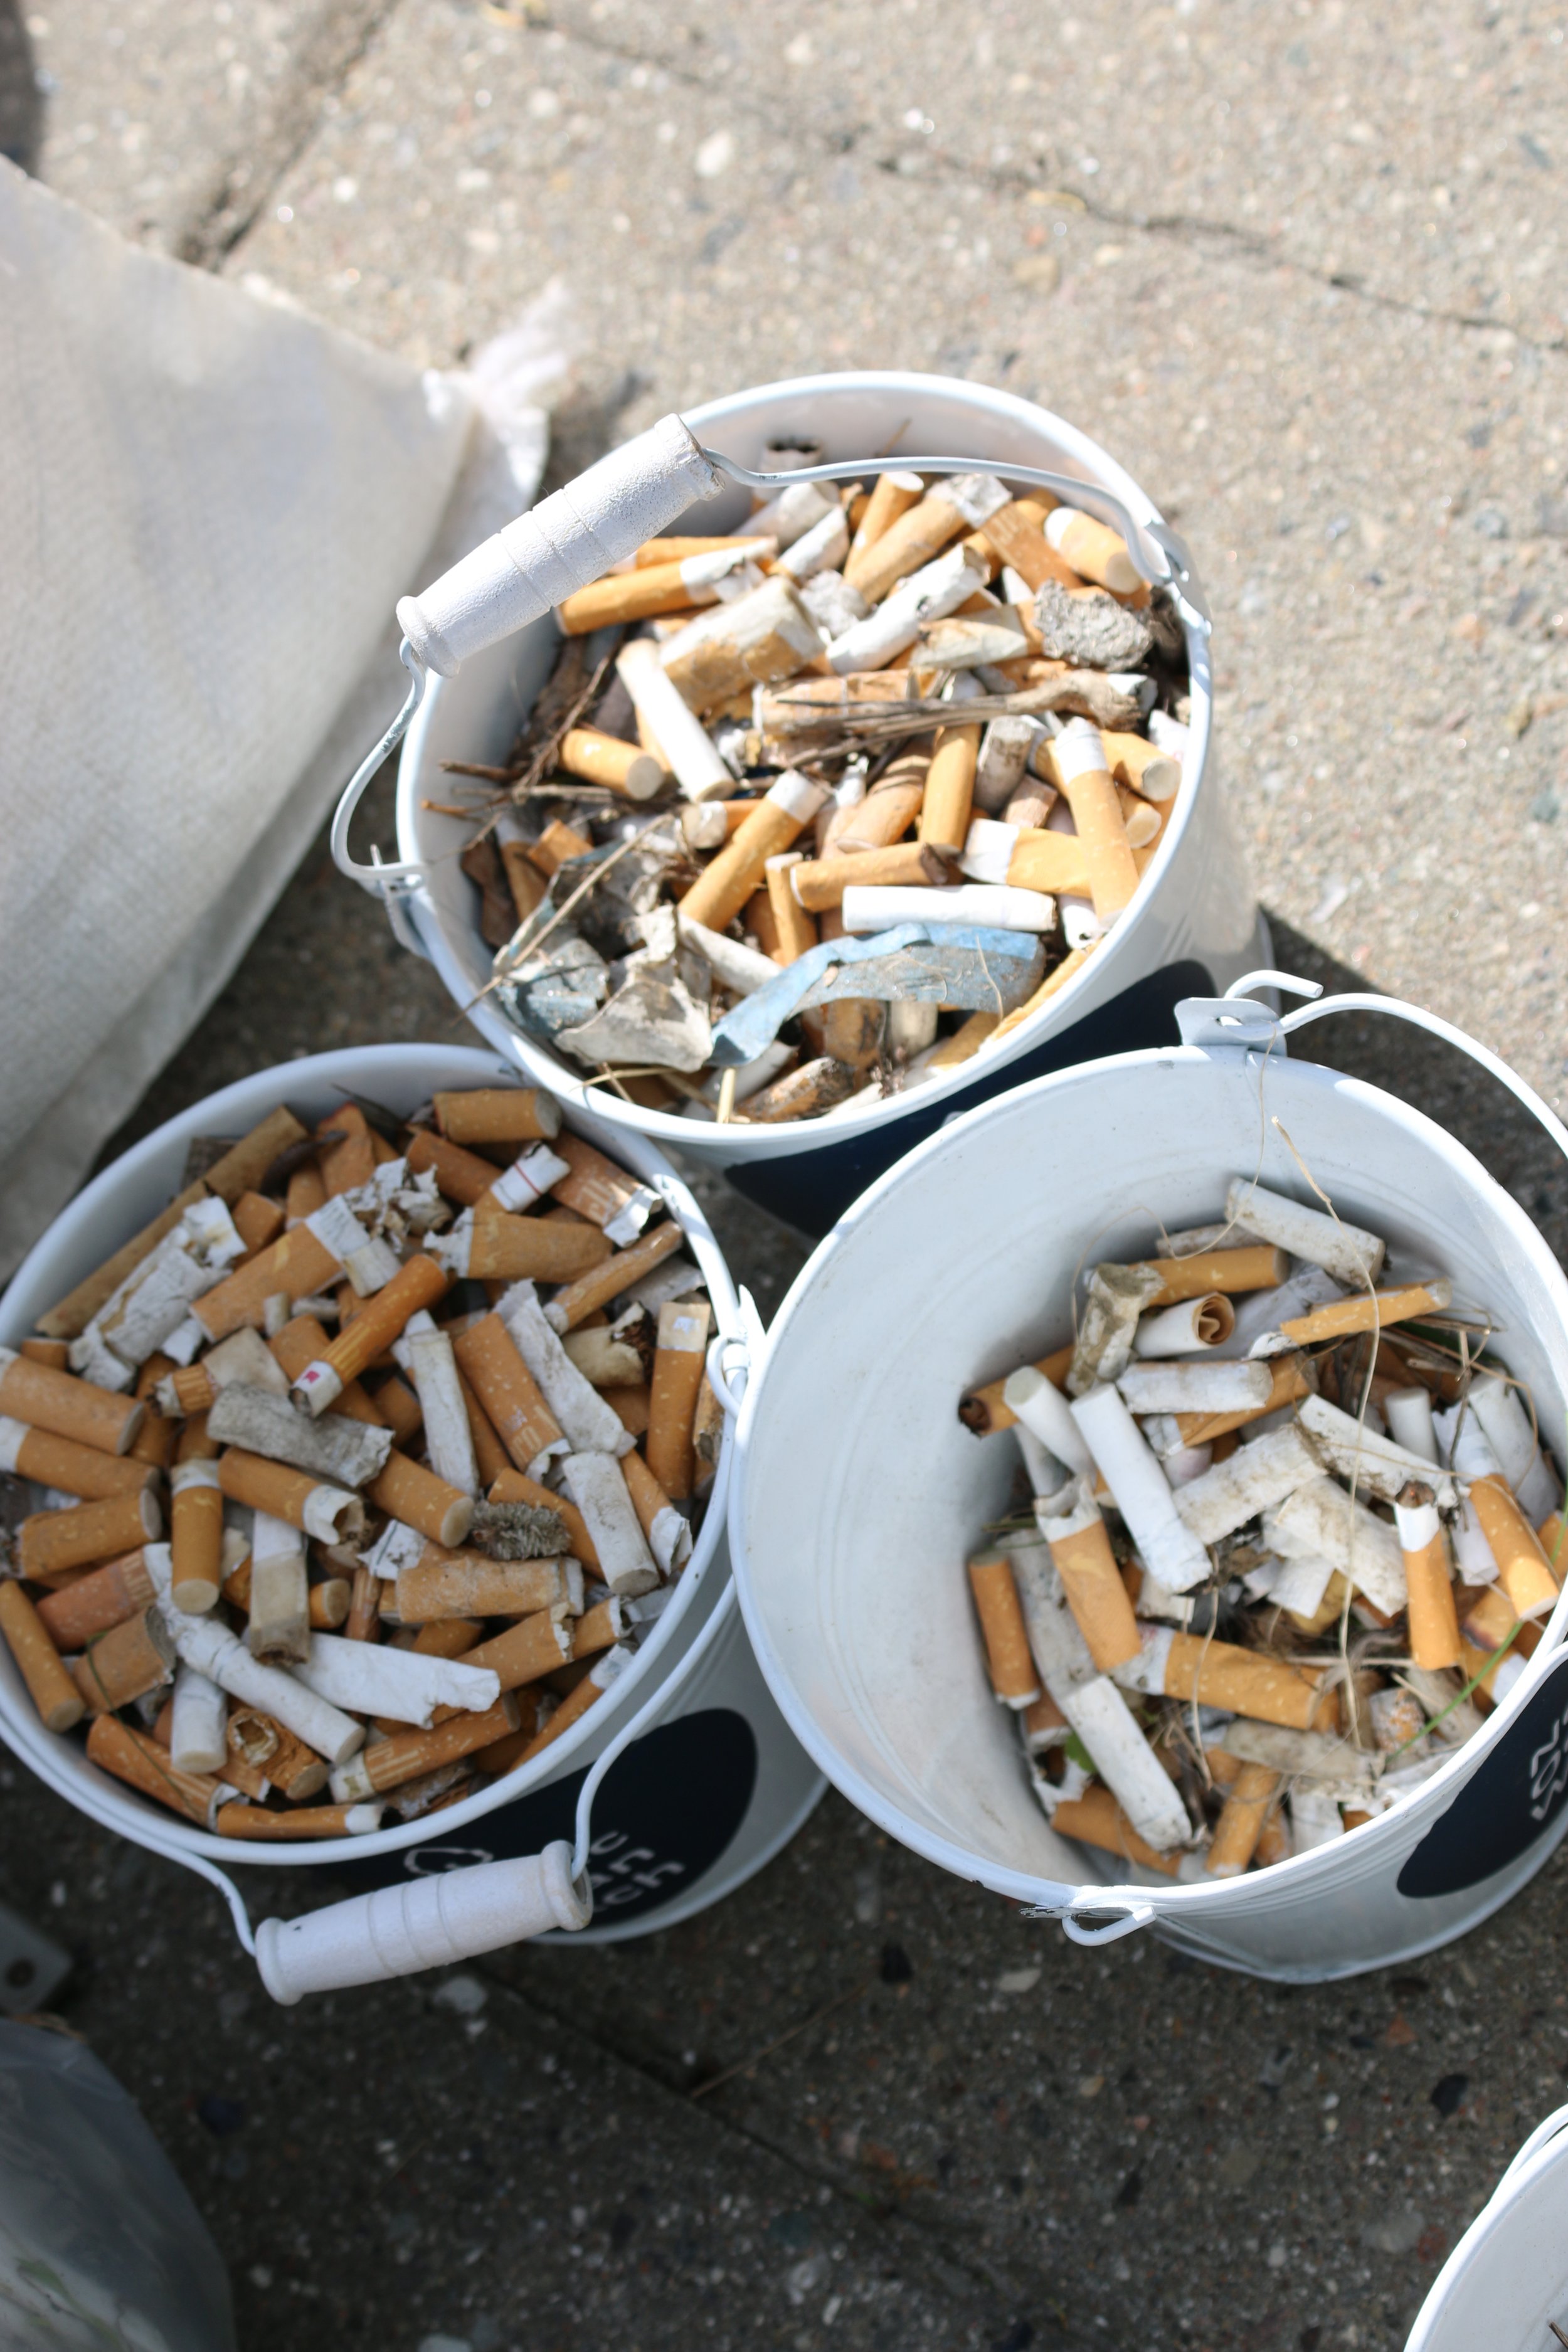 Cigarette buds ready to be recycled